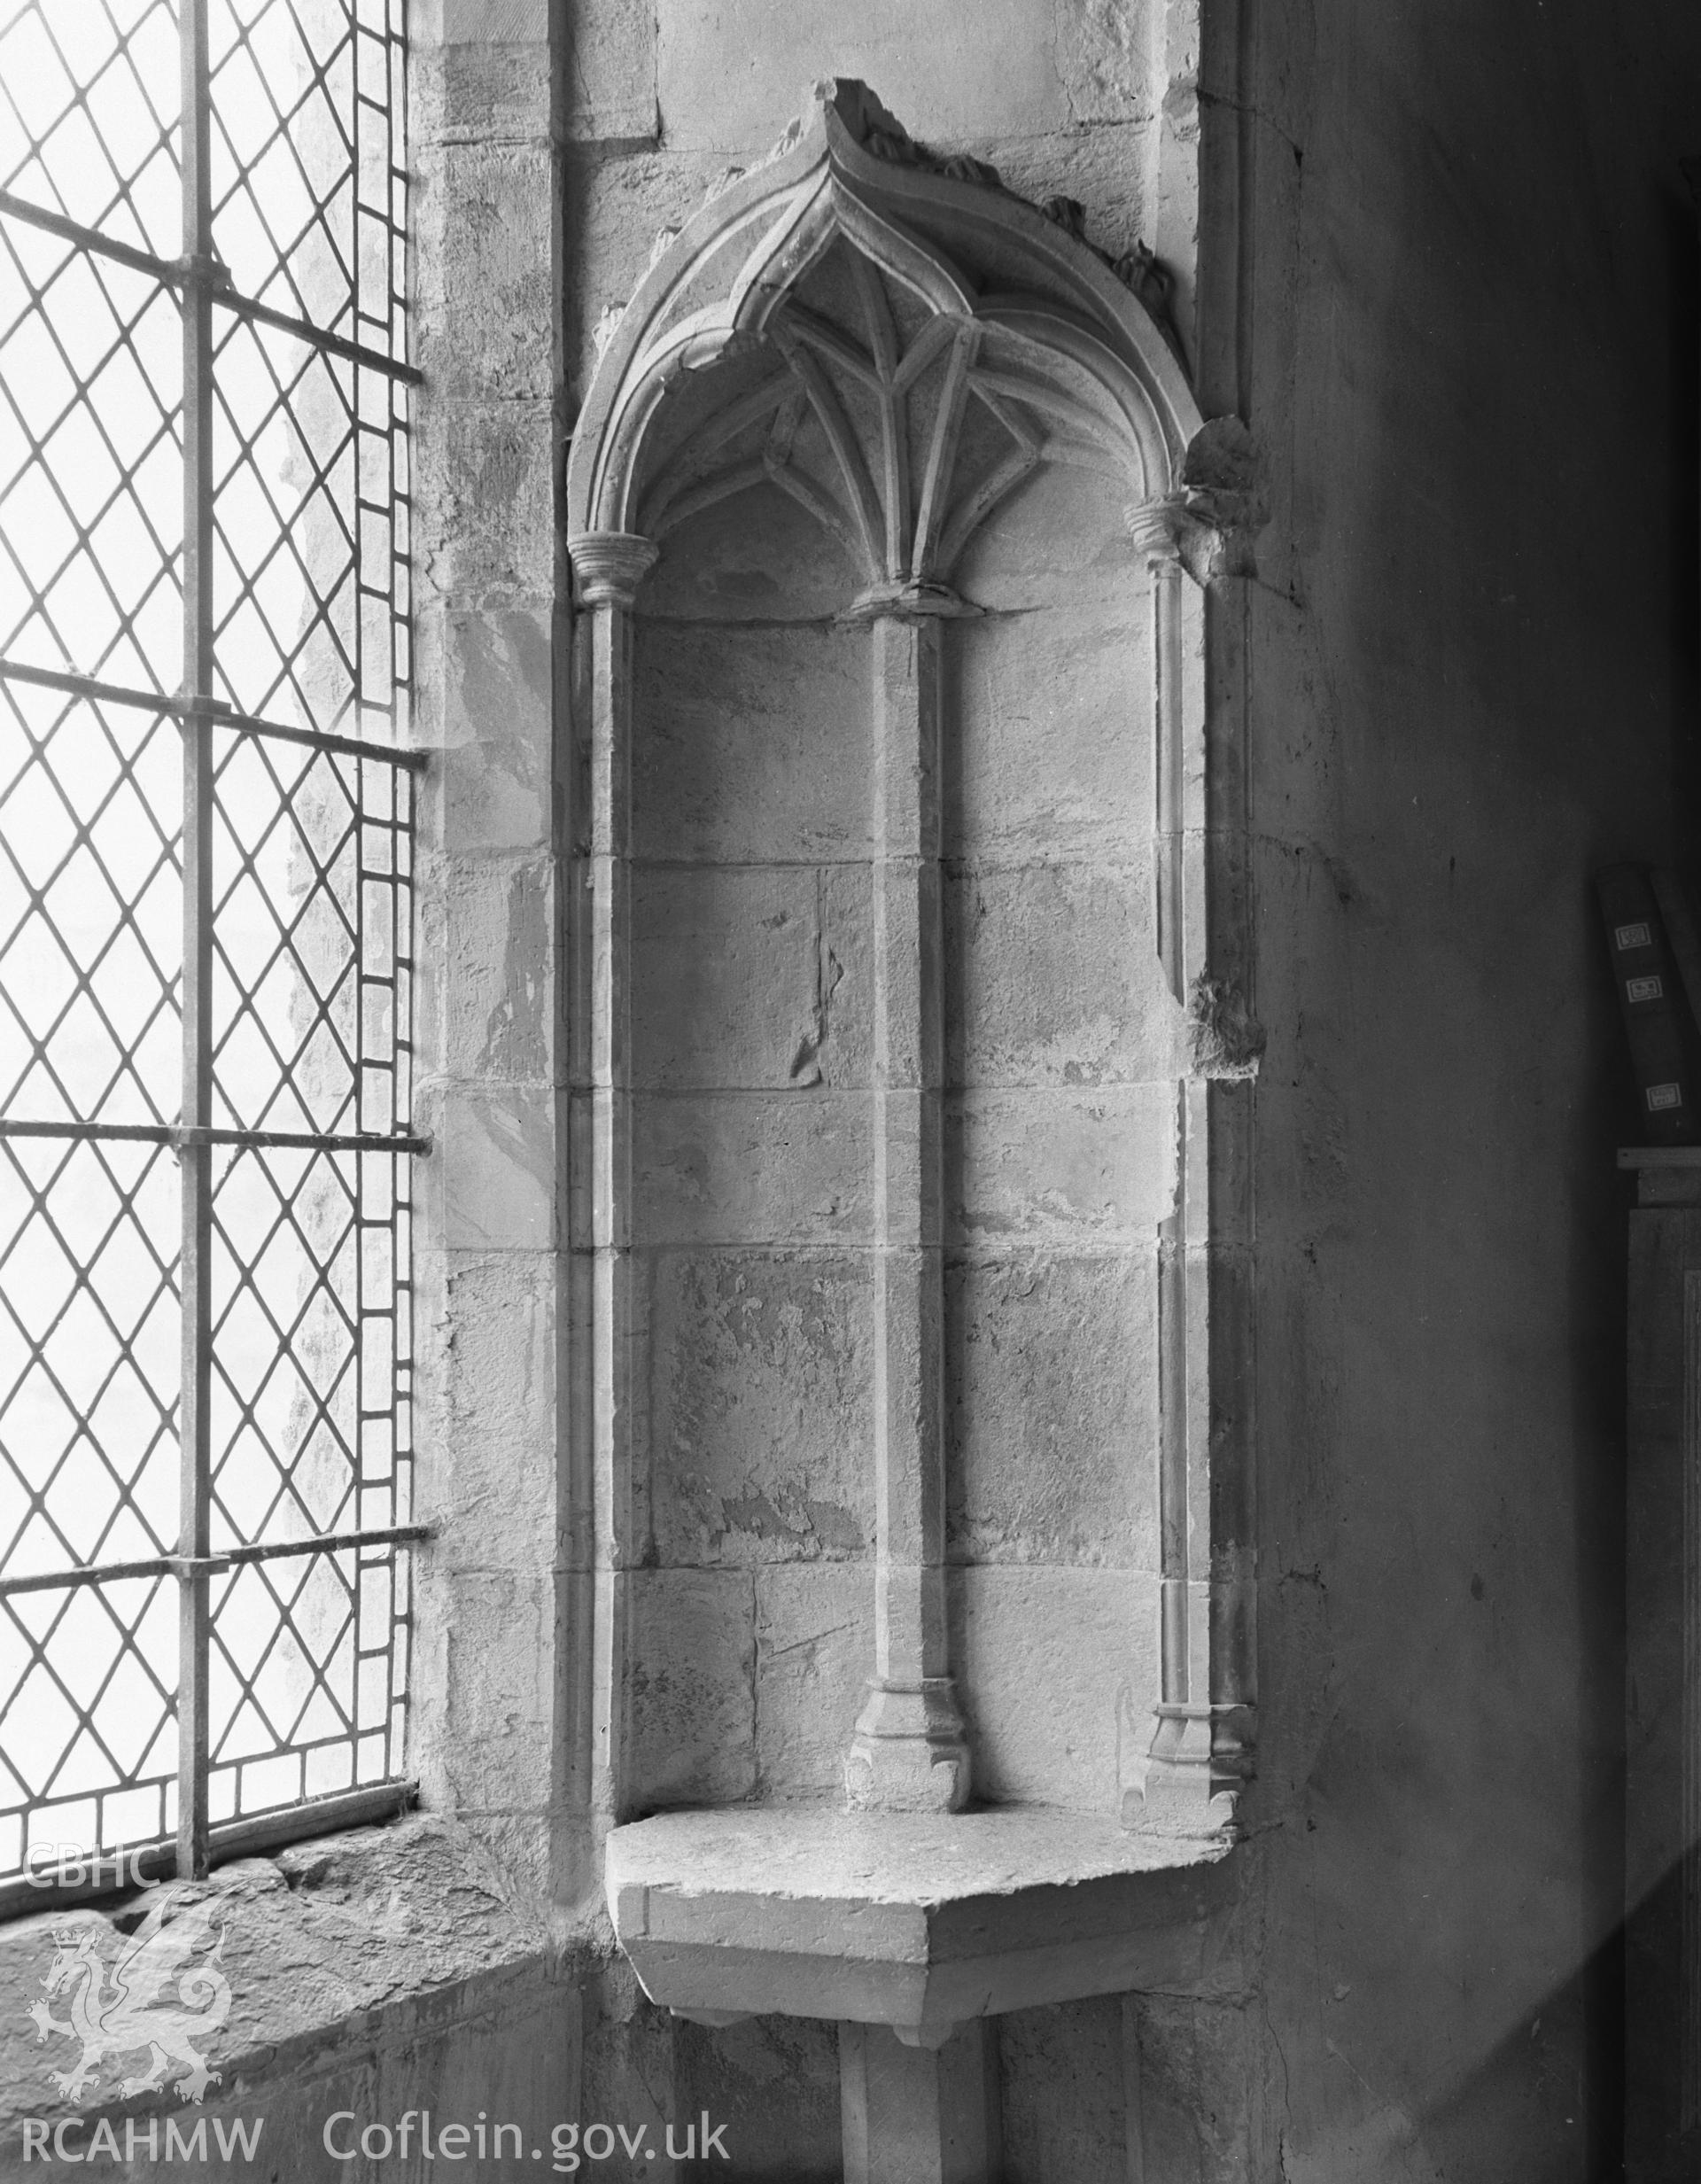 Interior view showing niche in the window reveal in the Chapter House.